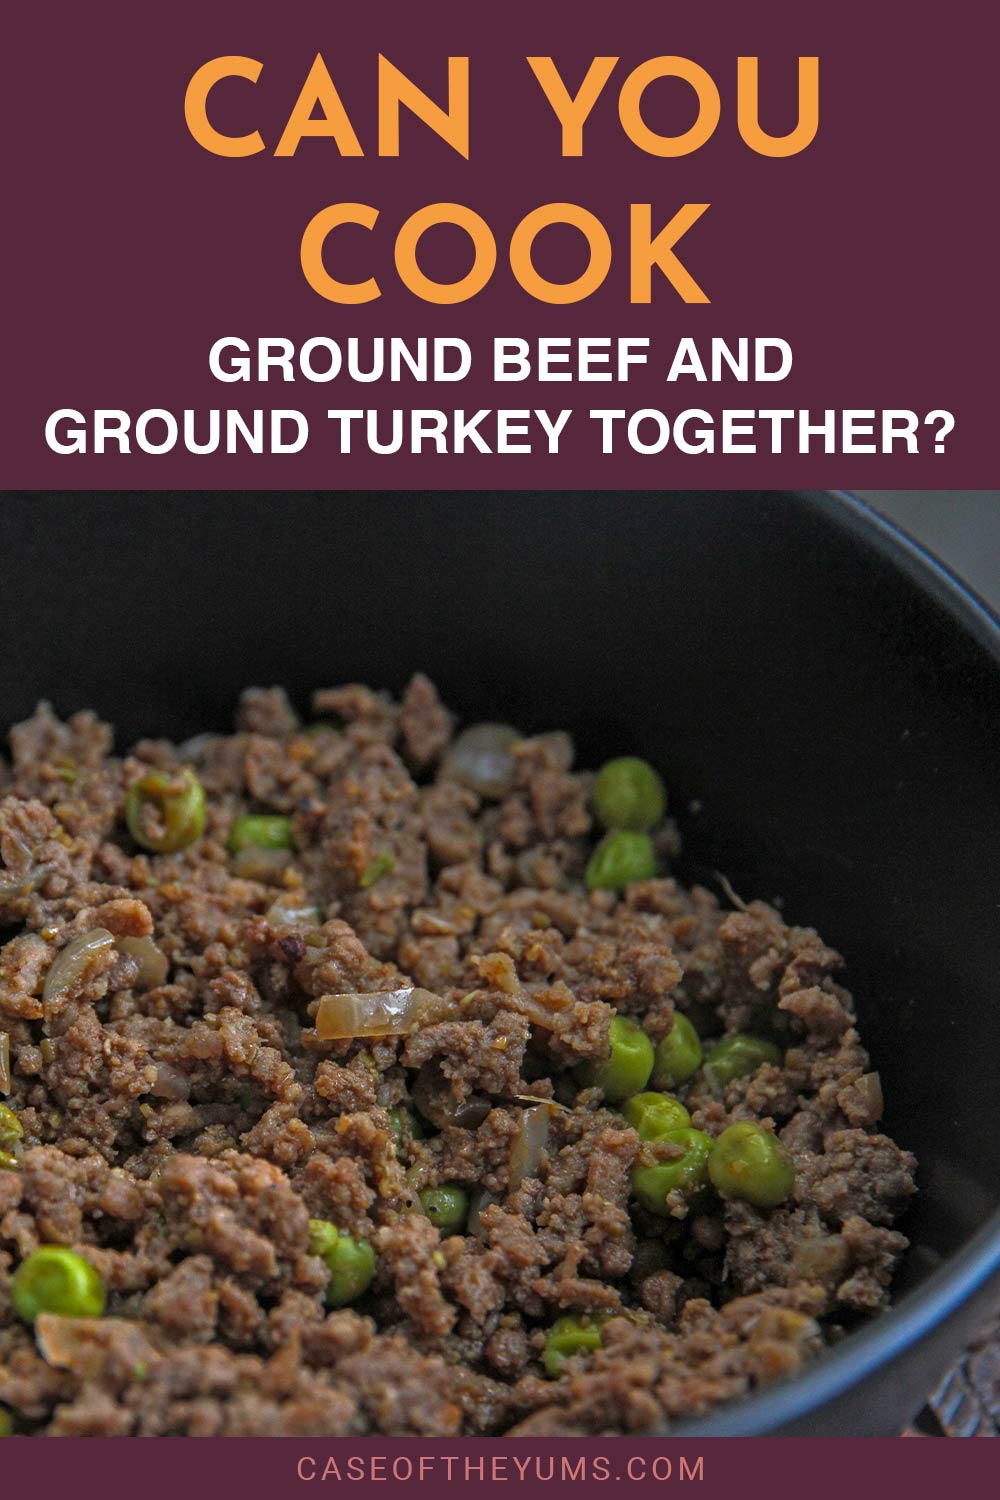 Ground meat cooked with peas - Can You Cook Ground Beef and Ground Turkey Together?